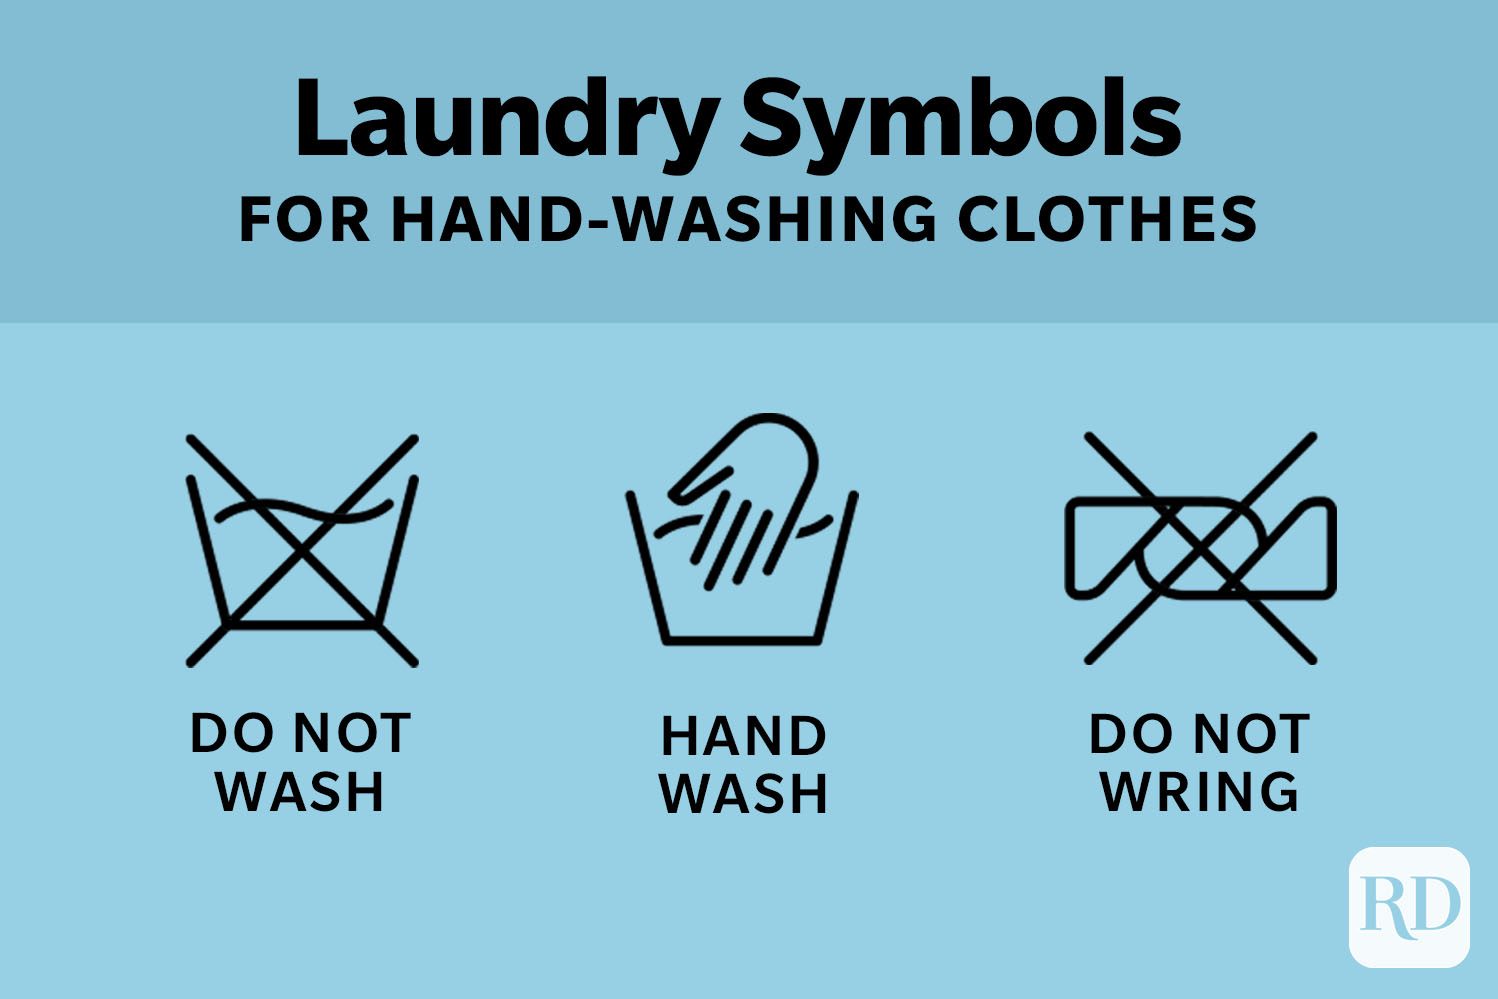 https://www.rd.com/wp-content/uploads/2021/09/laundry-symbols-for-hand-washing-clothes-.jpg?fit=680%2C454